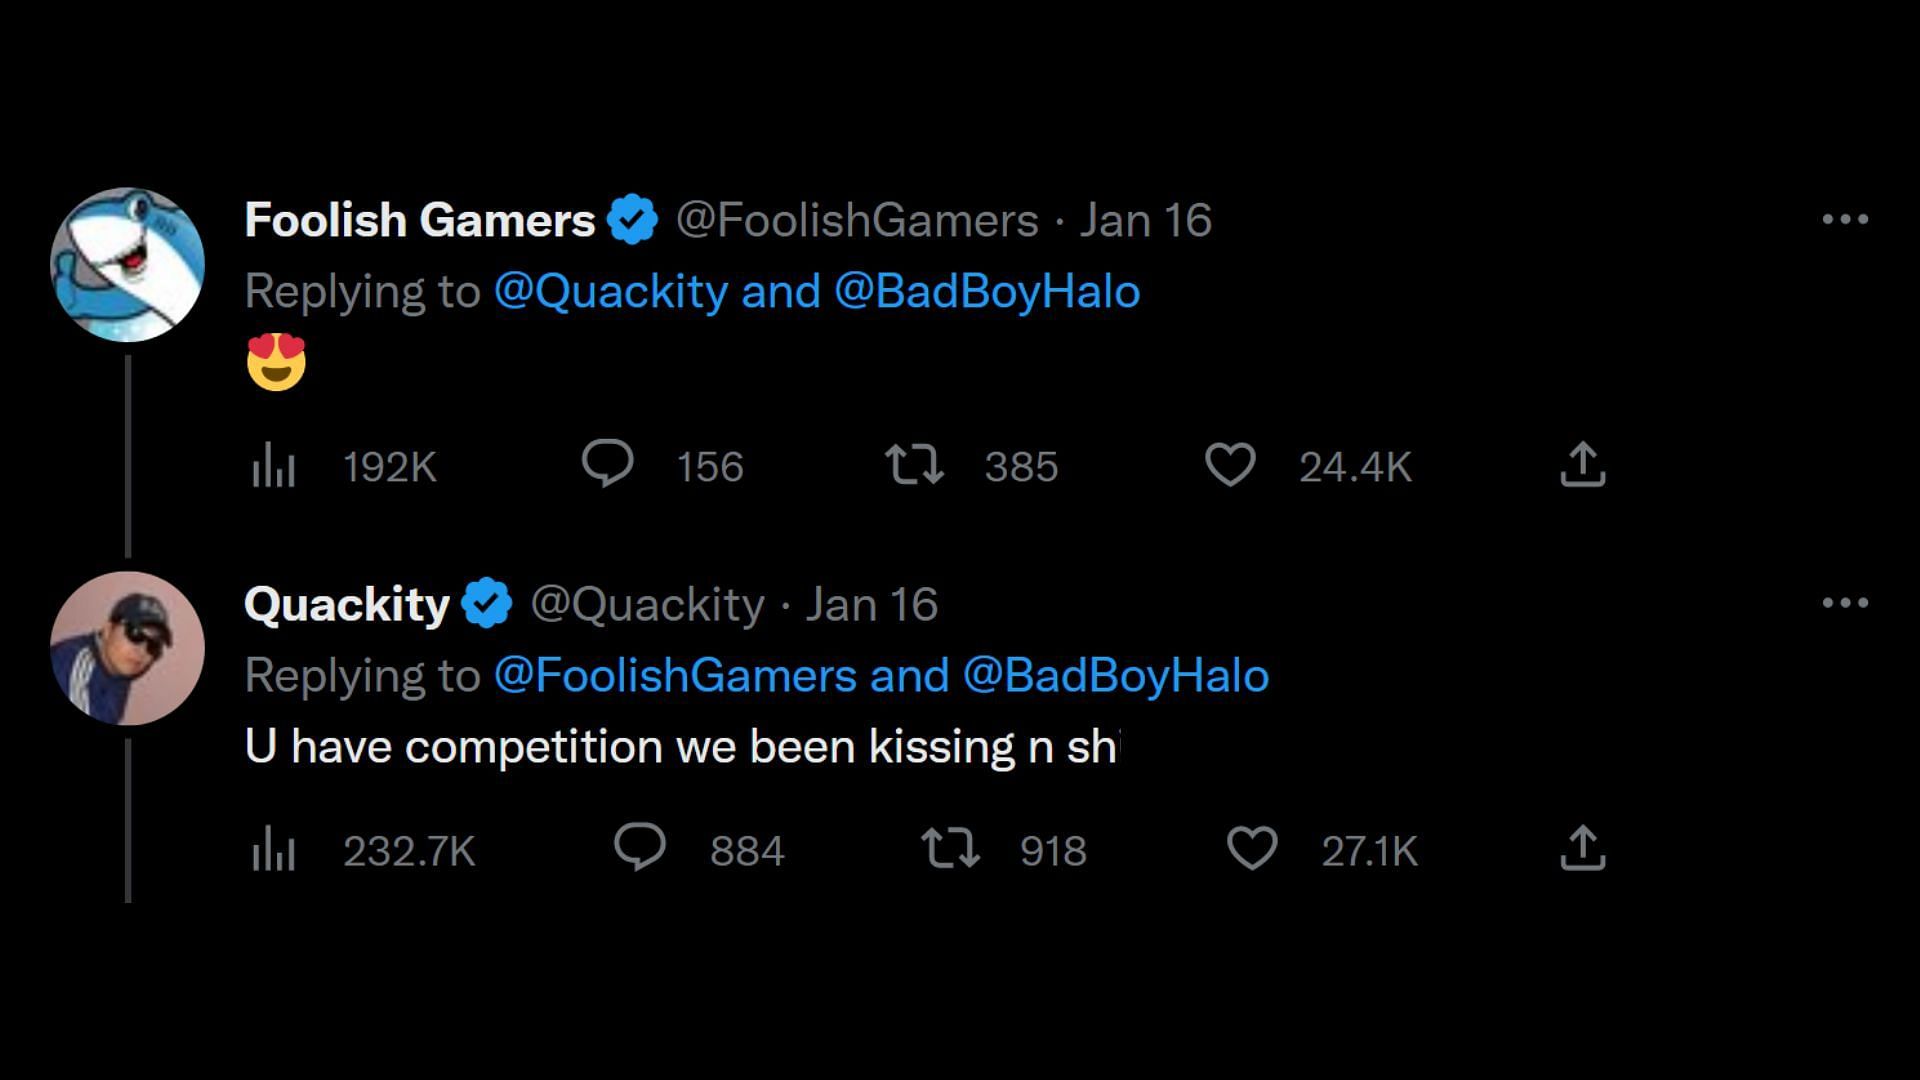 The Twitter banter surrounding the picture of Skeppy and BadBoyHalo that was recently posted on Twitter (Image via Foolish Gamers/Twitter)